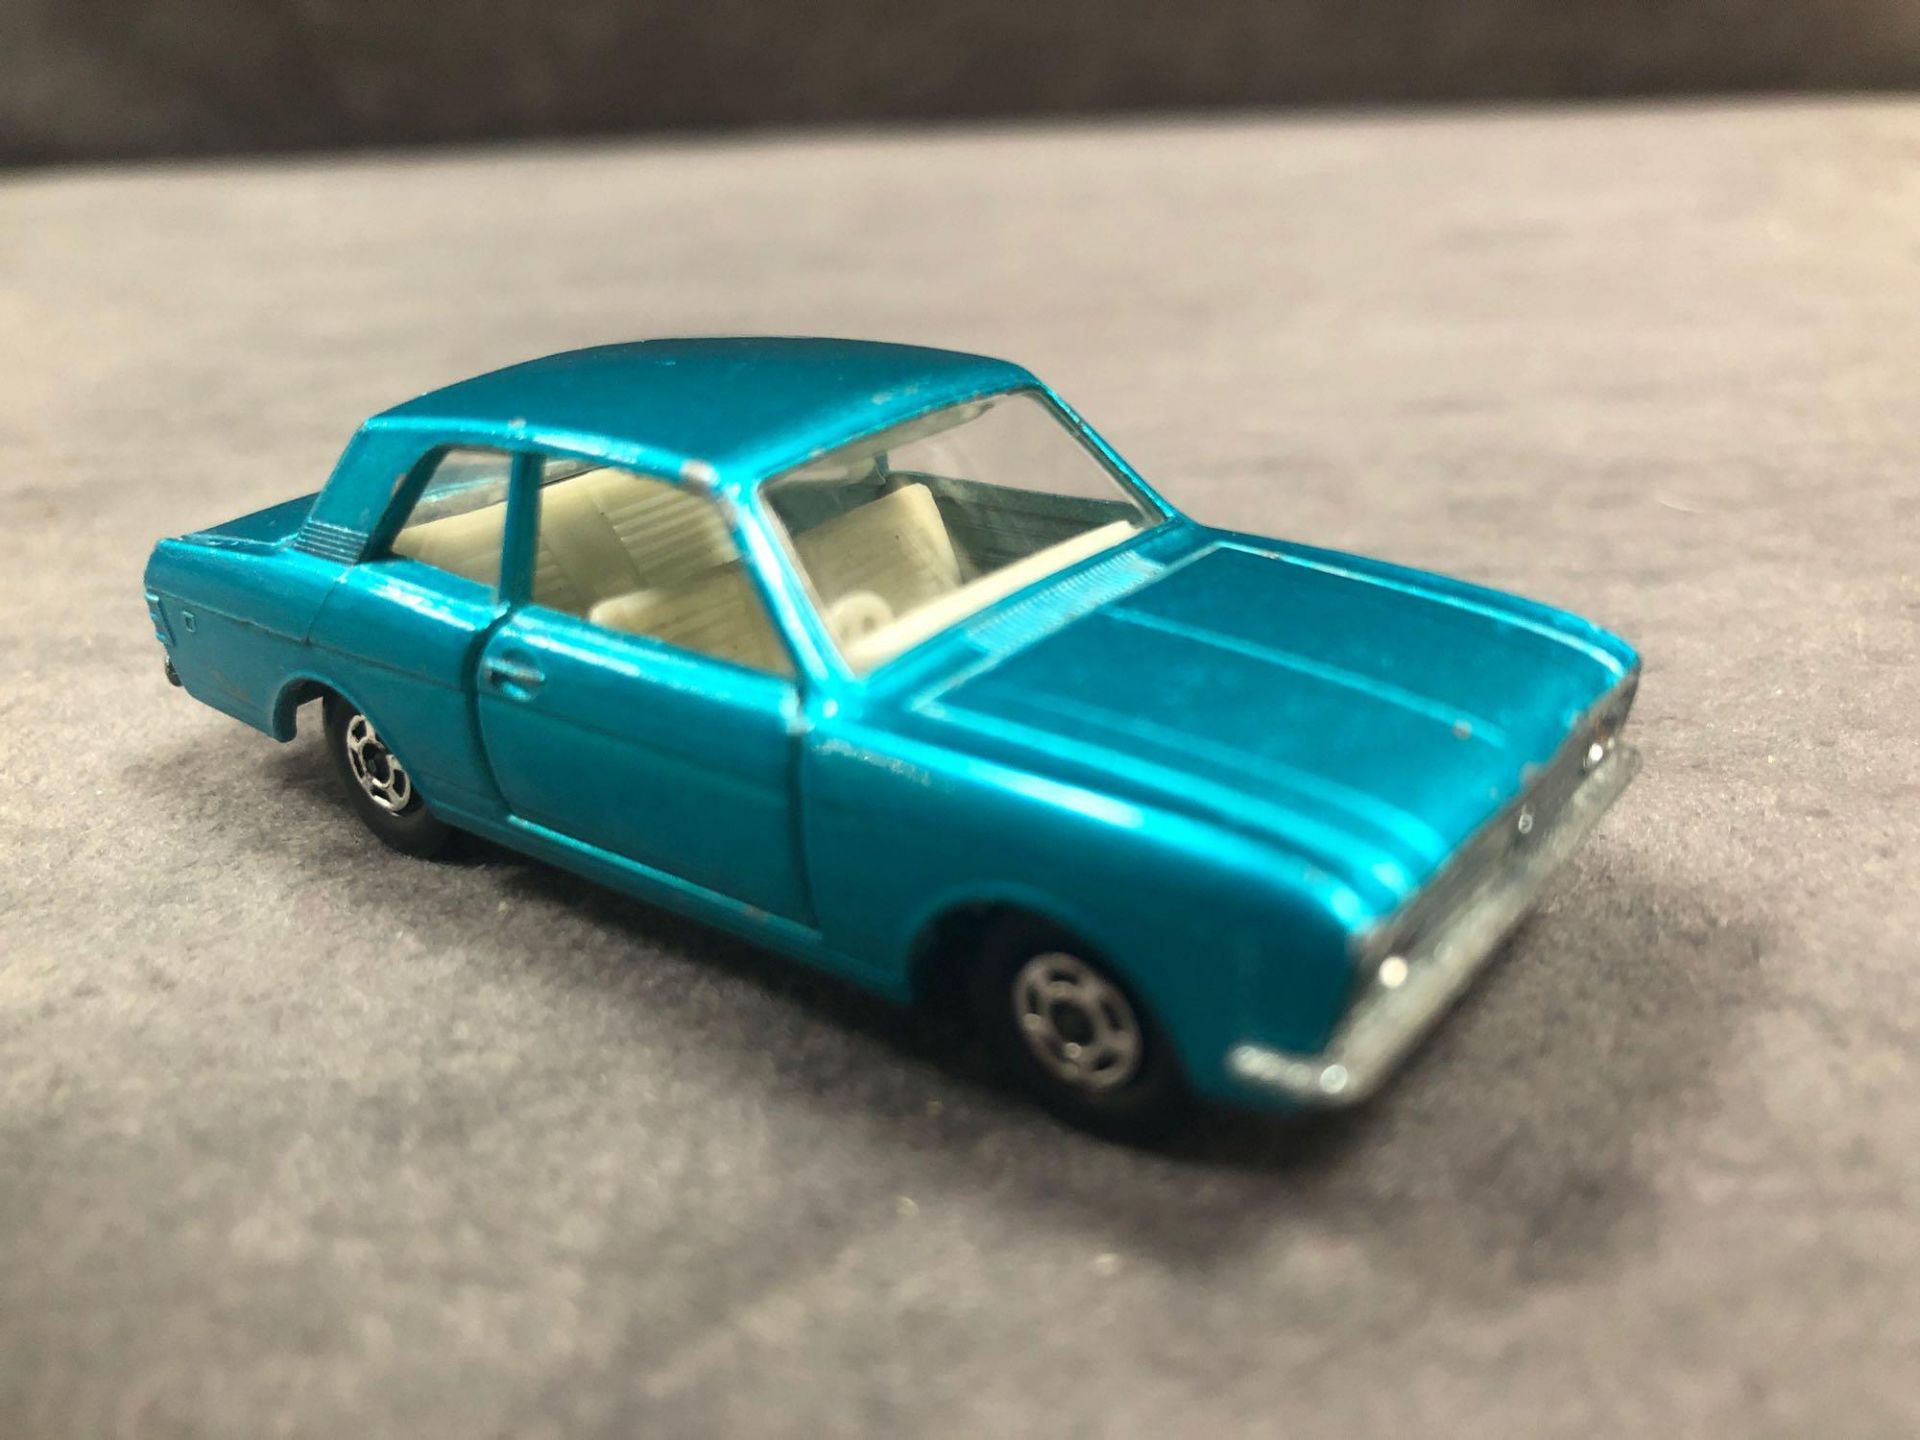 Mint Matchbox Superfast Diecast #25 Ford Cortina GT In Metallic Blue With In Crisp Box - Image 2 of 3